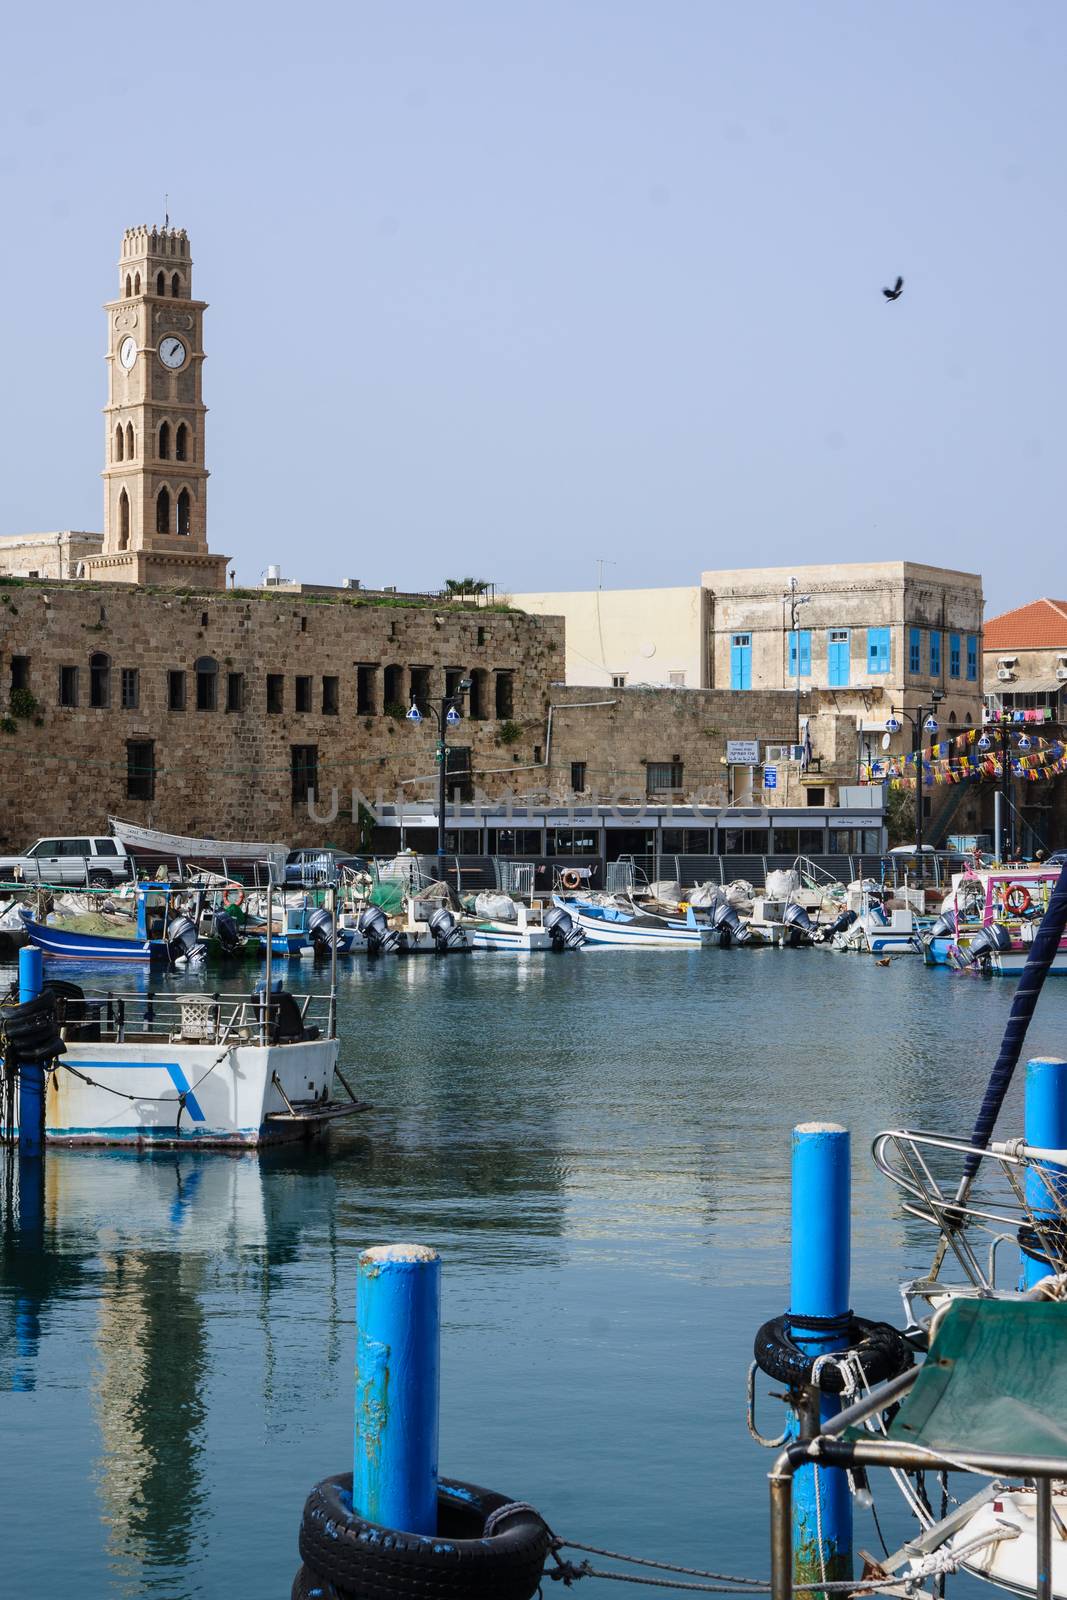 ACRE, ISRAEL - MARCH 06, 2014: Fishing boats, yachts and nearby monuments, in the fishing harbor in the old city of Acre, Israel. Acre is one of the oldest continuously inhabited sites in the world.